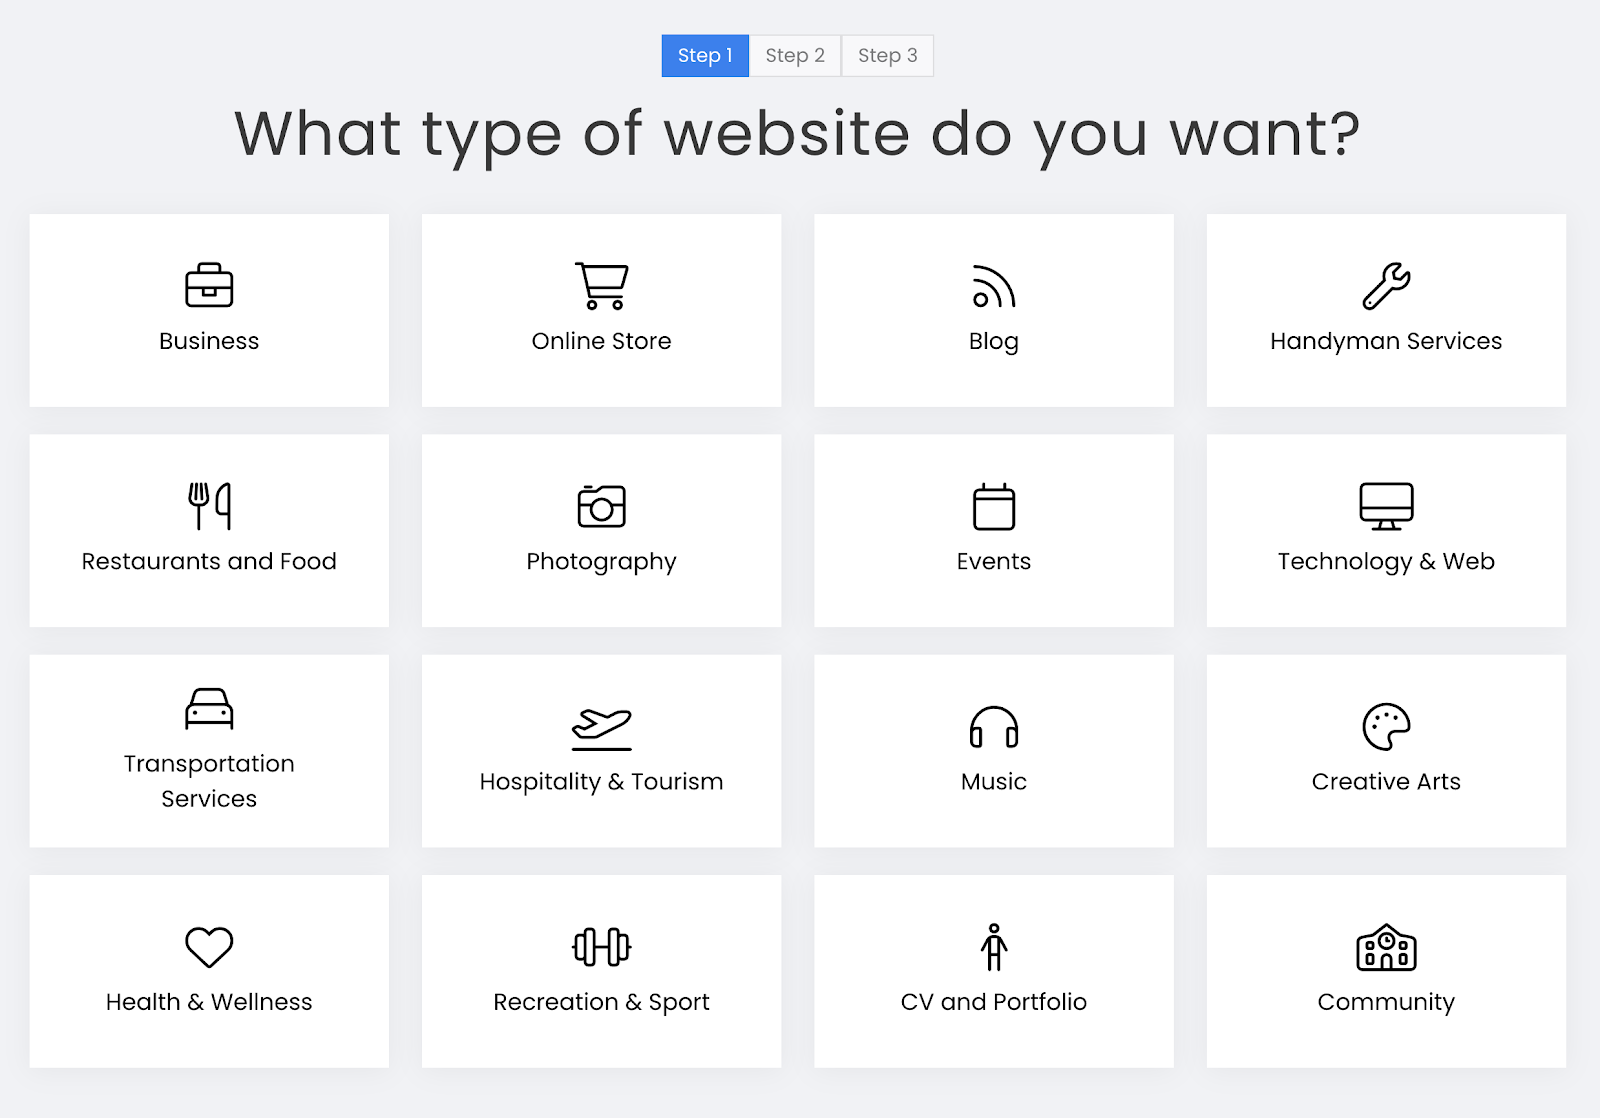 A screenshot from SITE123 showing a page that asks you to decide what type of website you want.